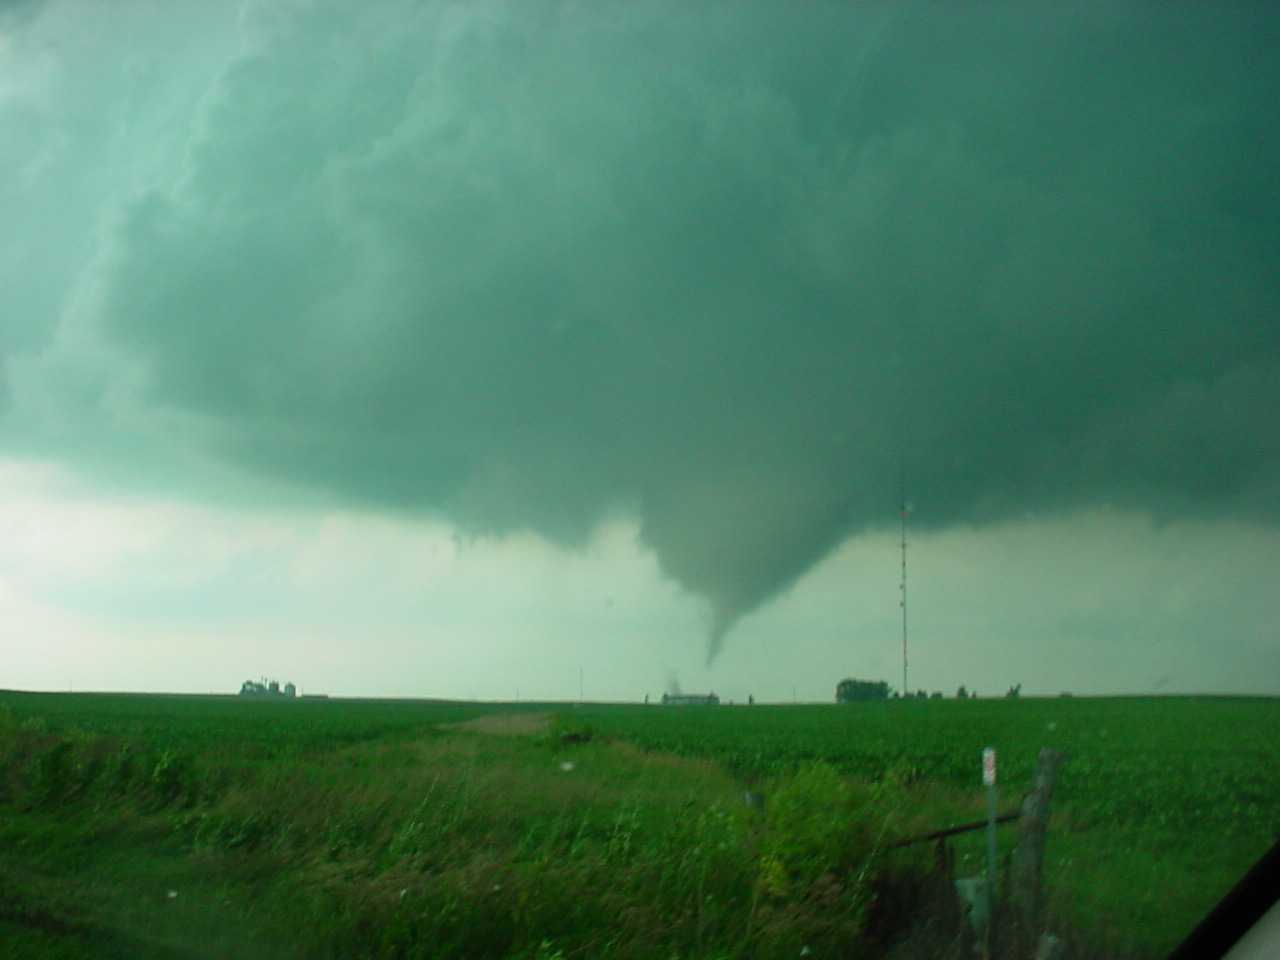 Tornado as it touched down 1.8 miles north of Metamora at 2:34 PM. Photo by Jason Malson